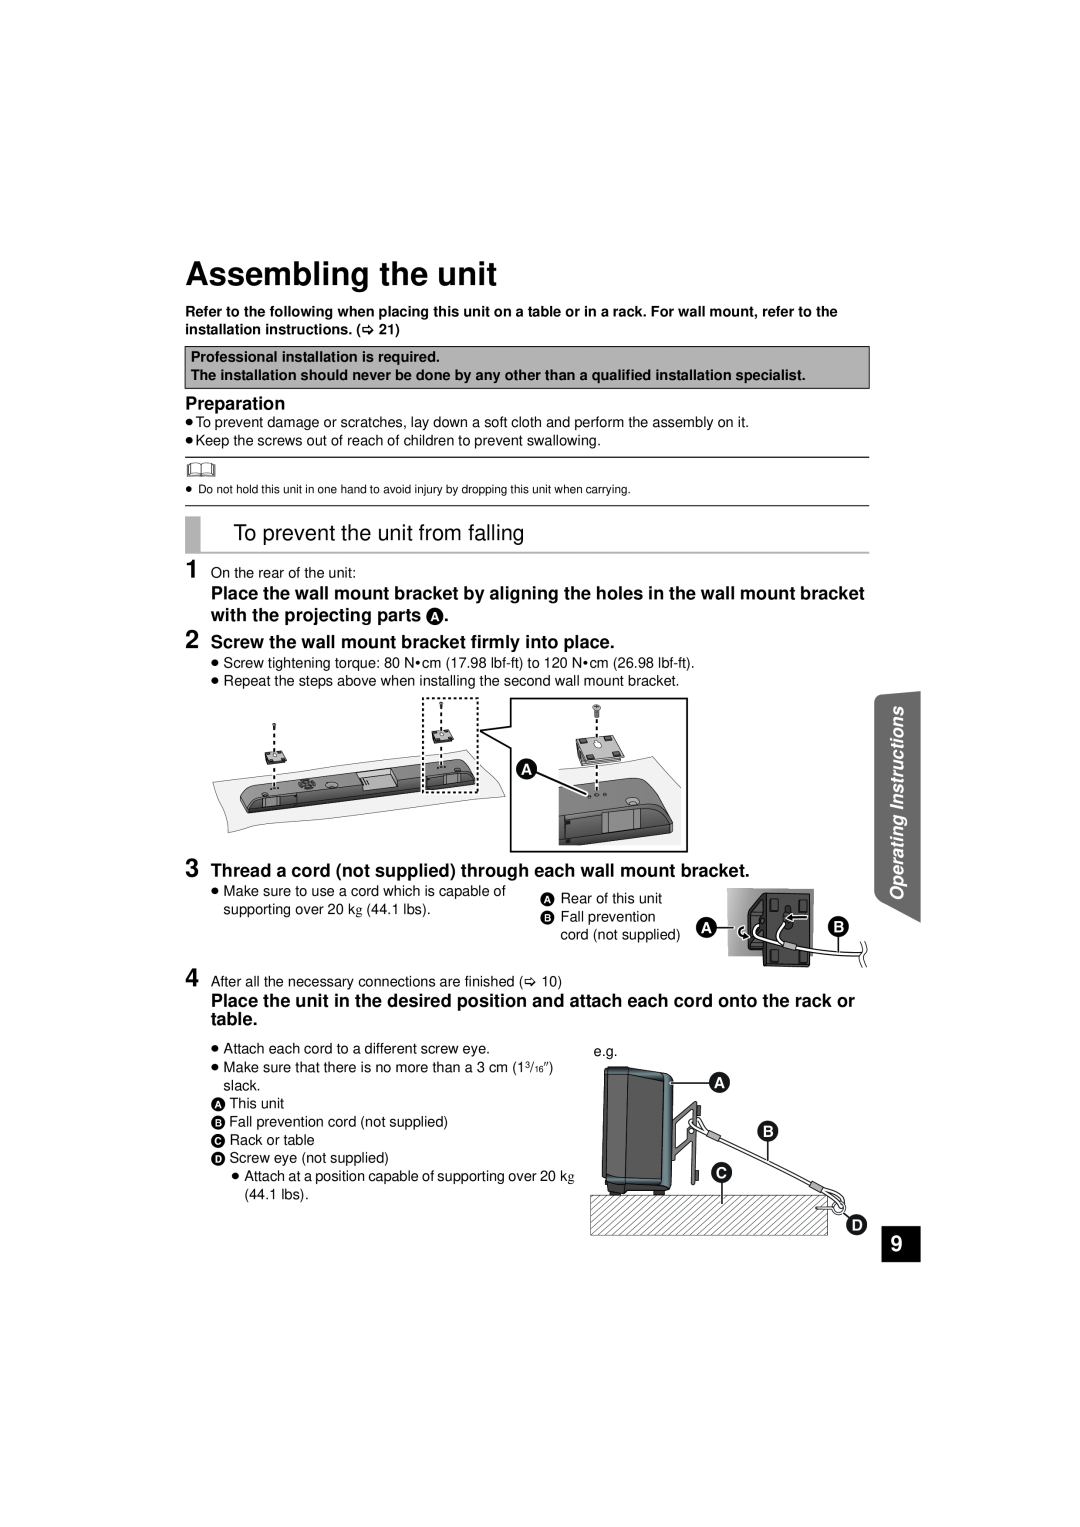 Panasonic RQTX1165-1P, SC-HTB10 Assembling the unit, To prevent the unit from falling,    , Operating Instructions 